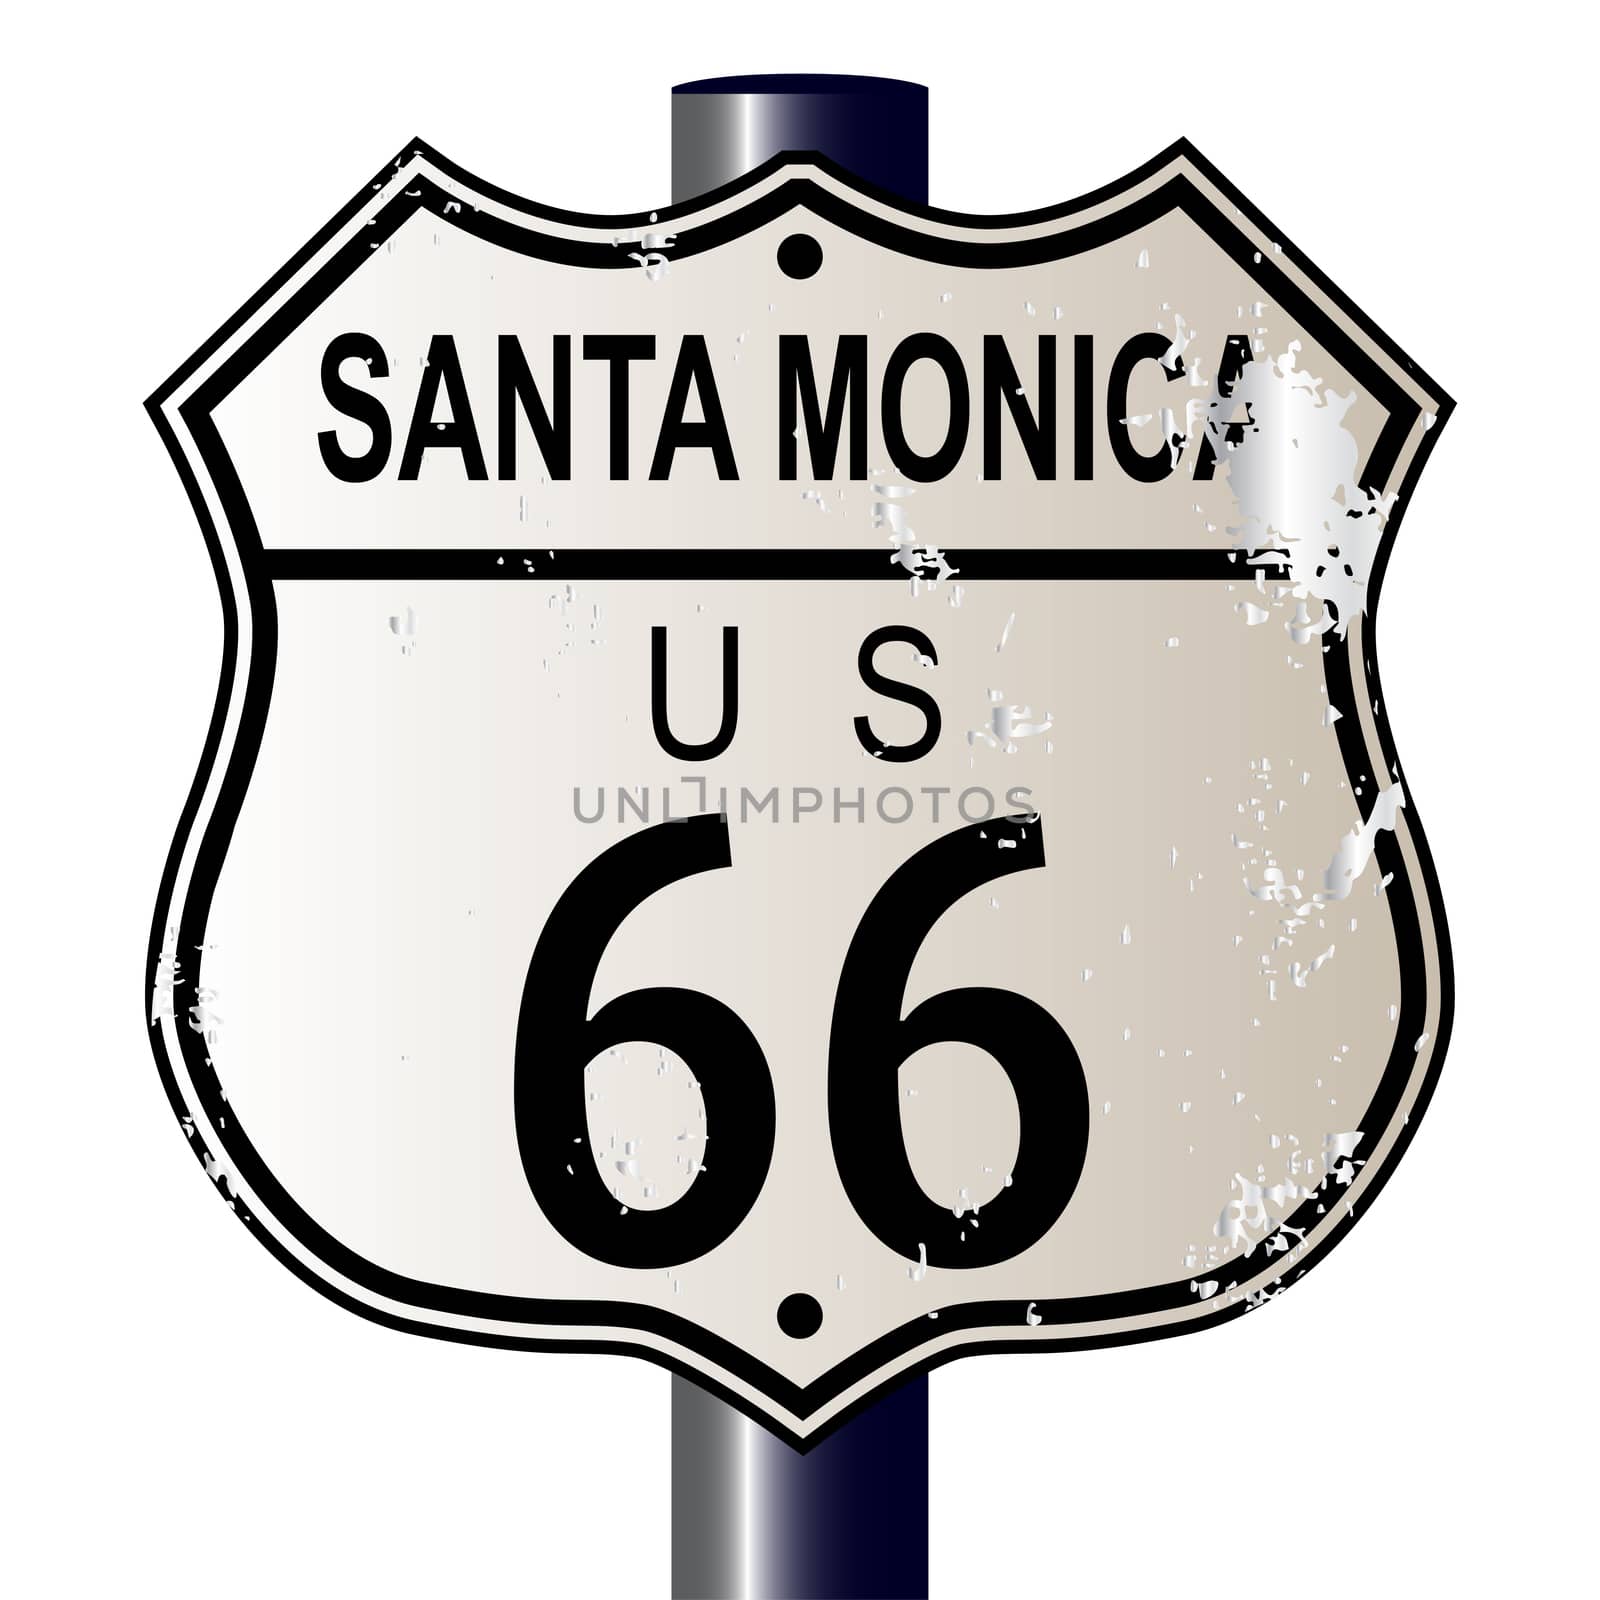 Santa Monica Route 66 traffic sign over a white background and the legend ROUTE US 66